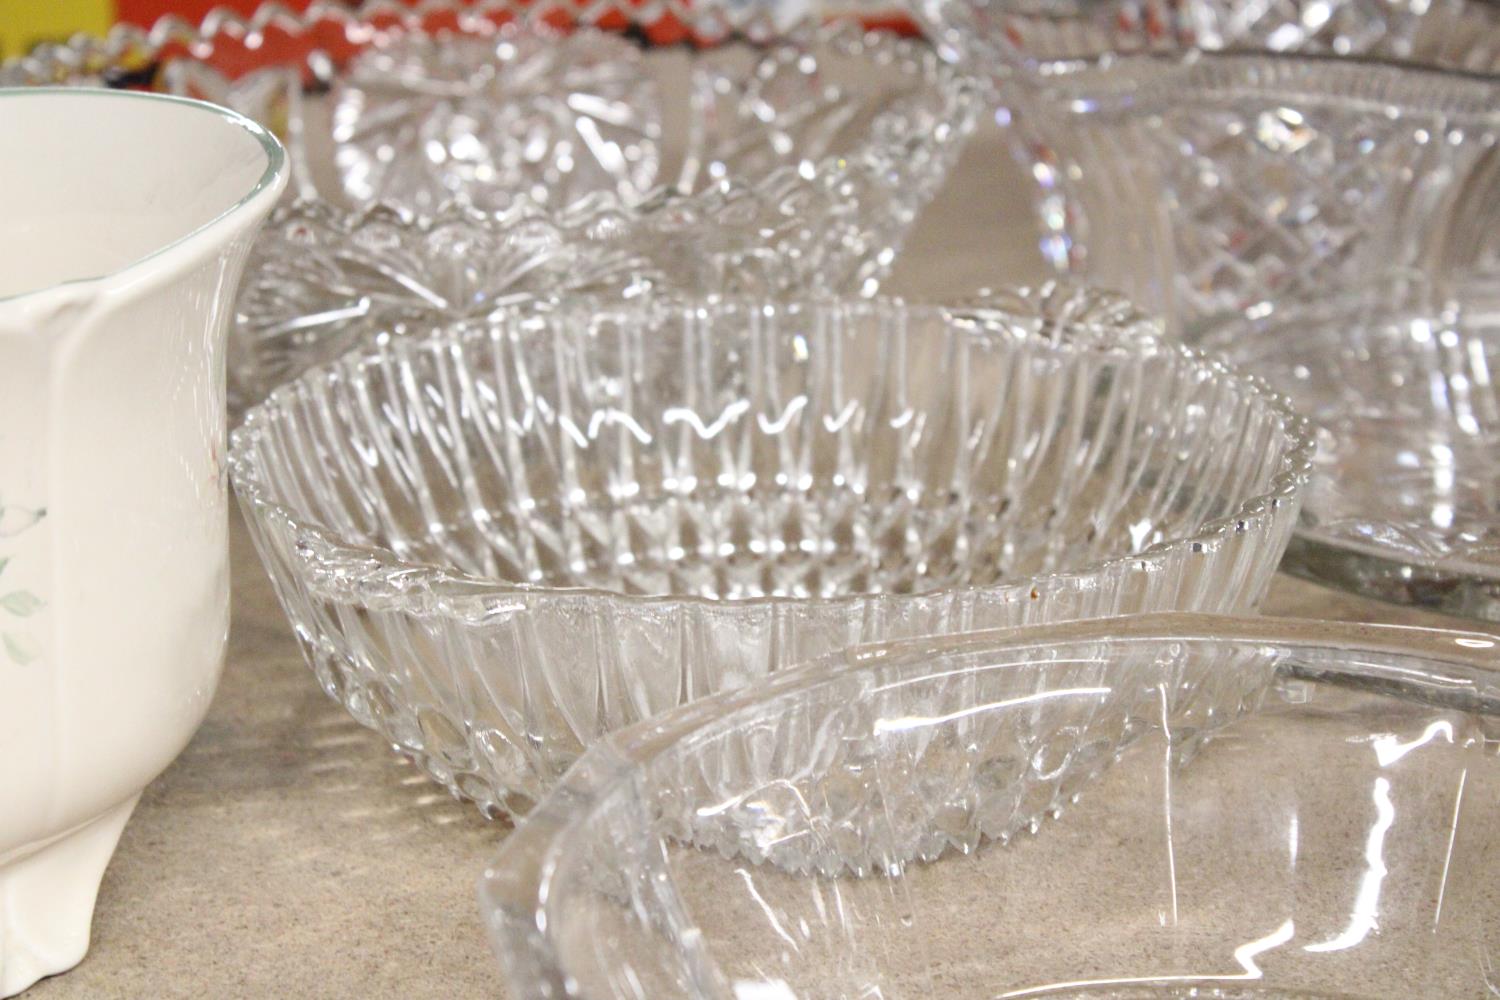 FIVE VINTAGE GLASS BOWLS AND A CAKE PLATE - Image 4 of 5